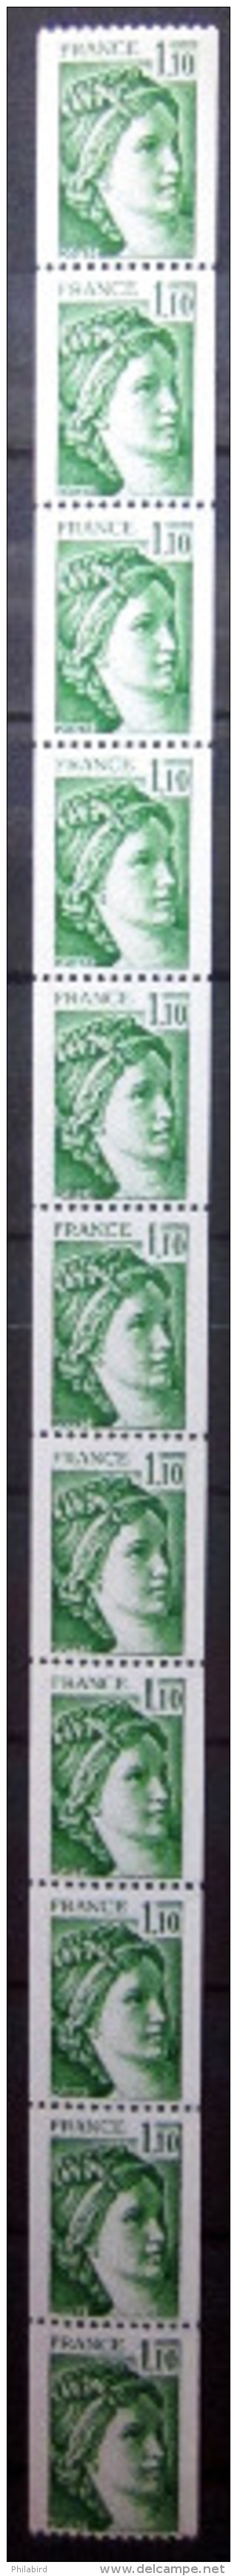 FRANCE            ROULETTE  73  (11 Timbres)            NEUF** - Roulettes